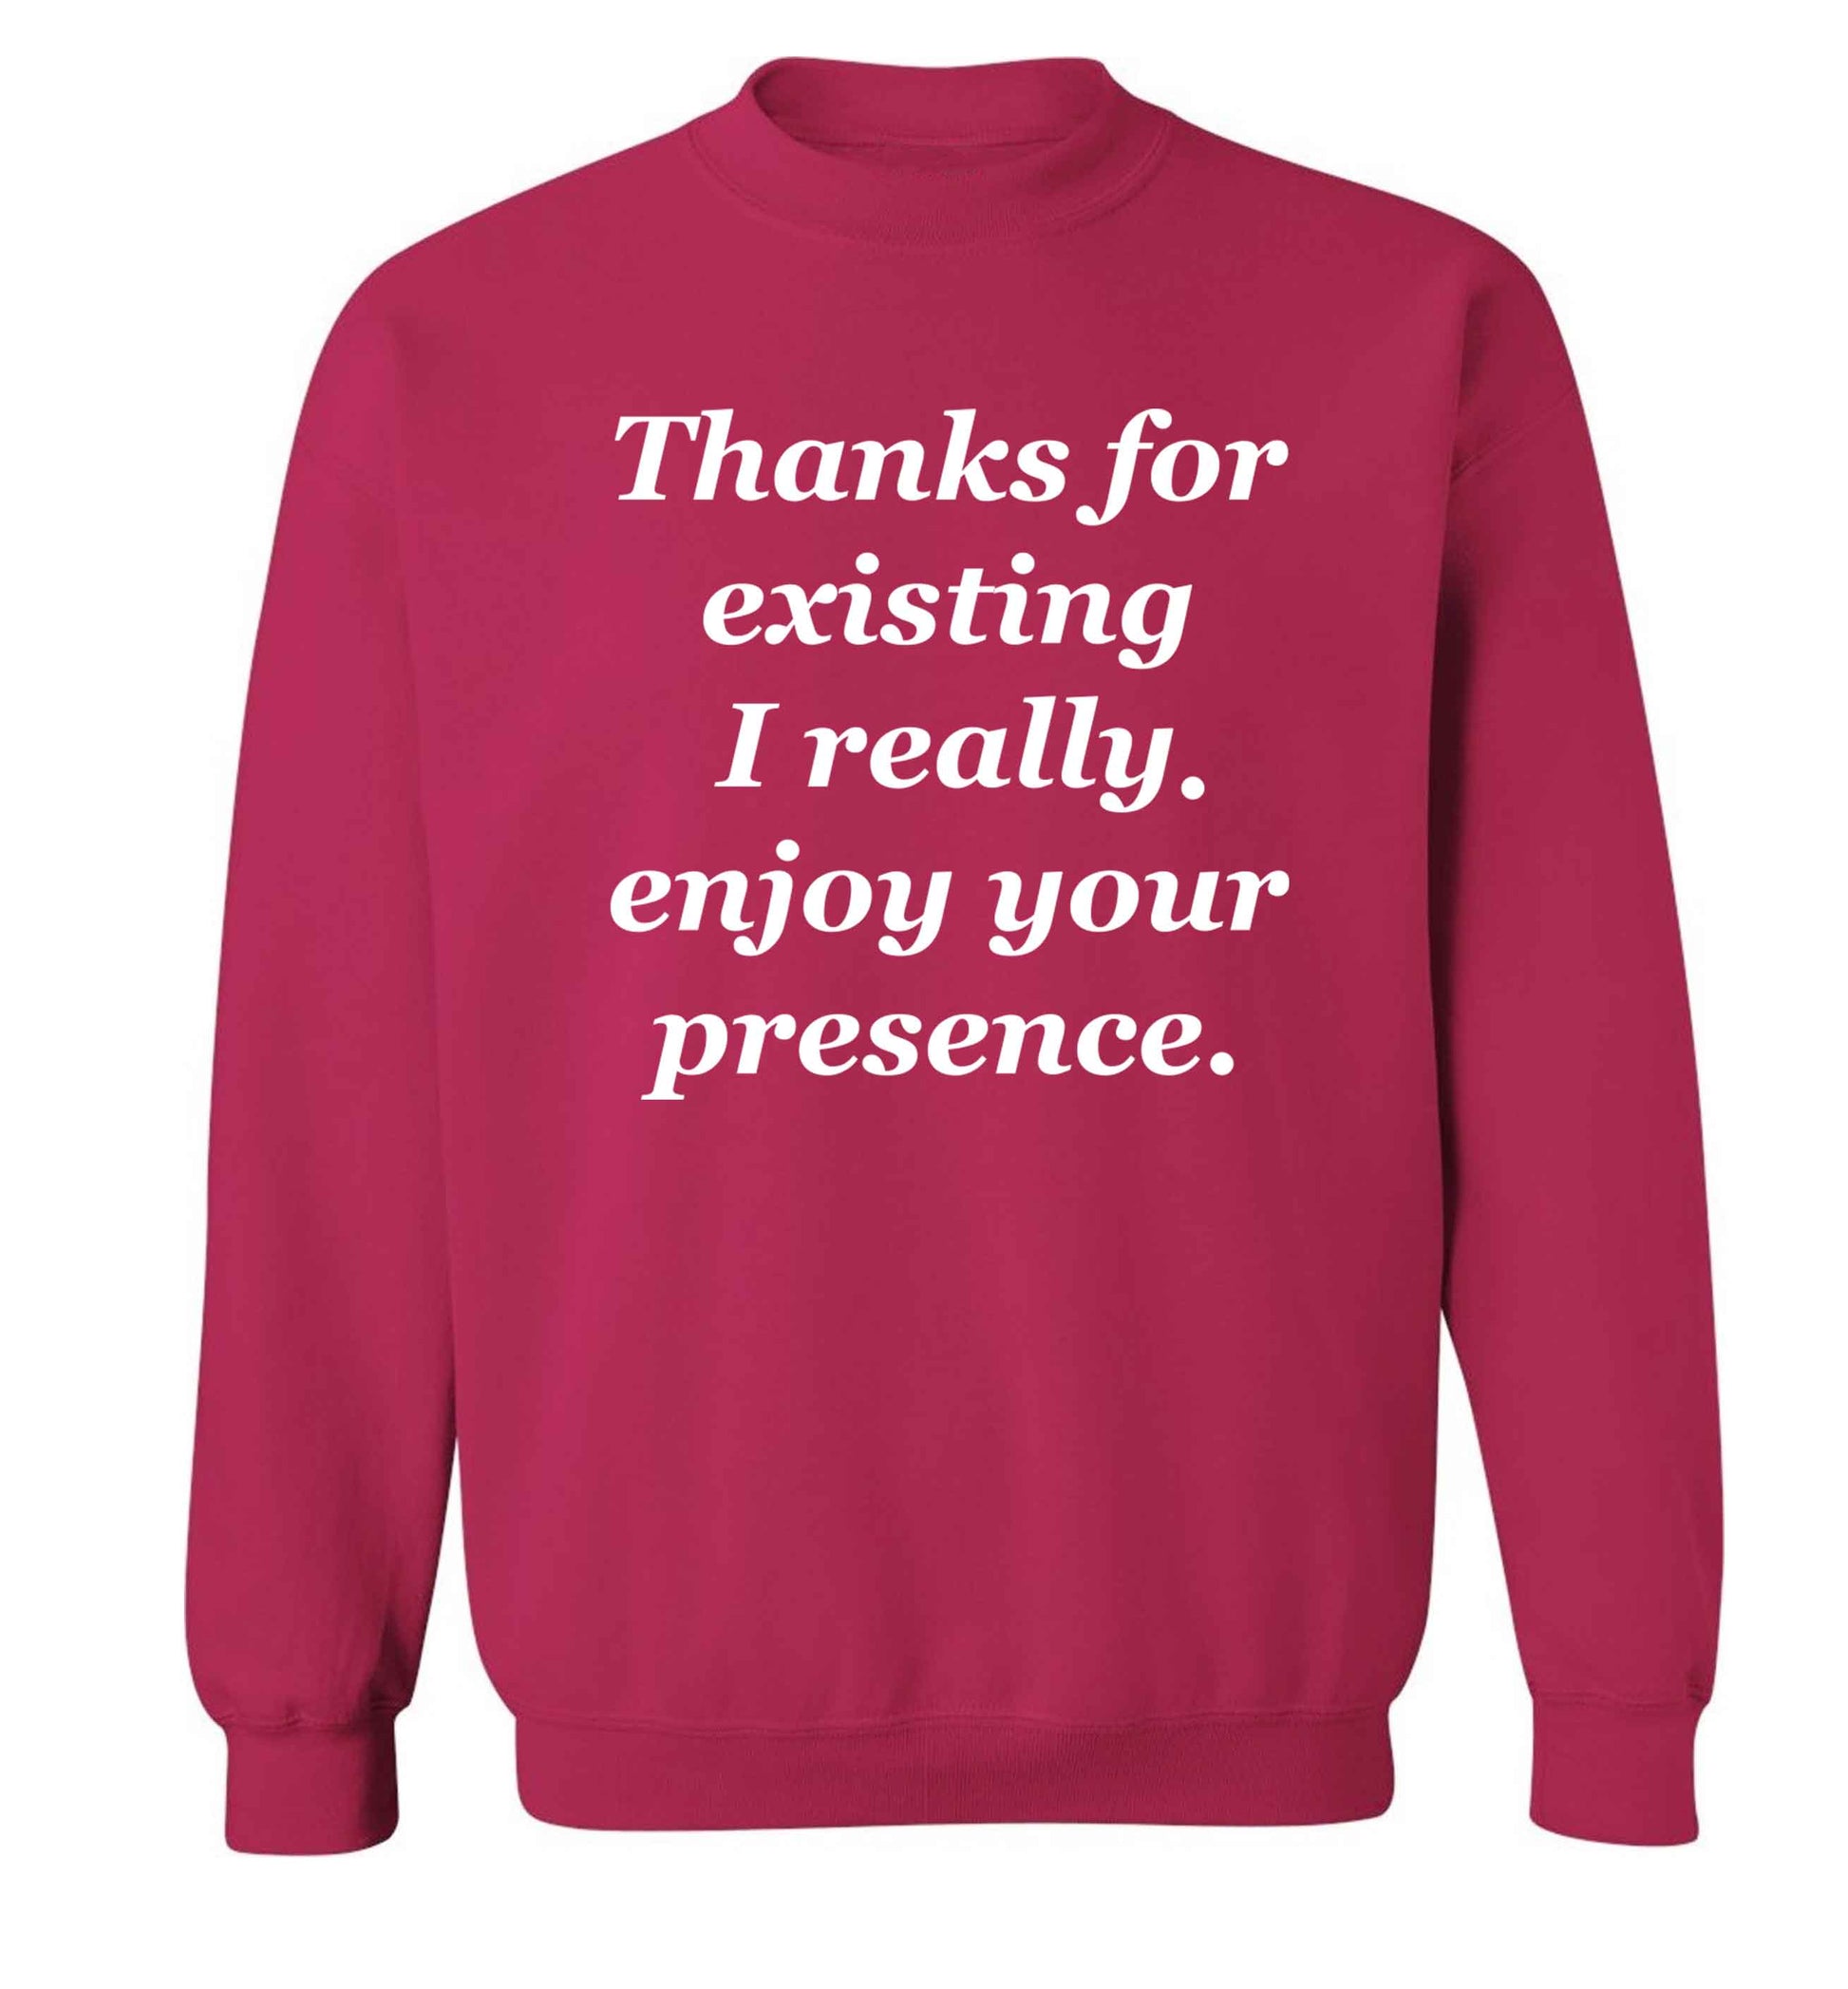 Thanks for existing I really enjoy your presence Adult's unisex pink Sweater 2XL